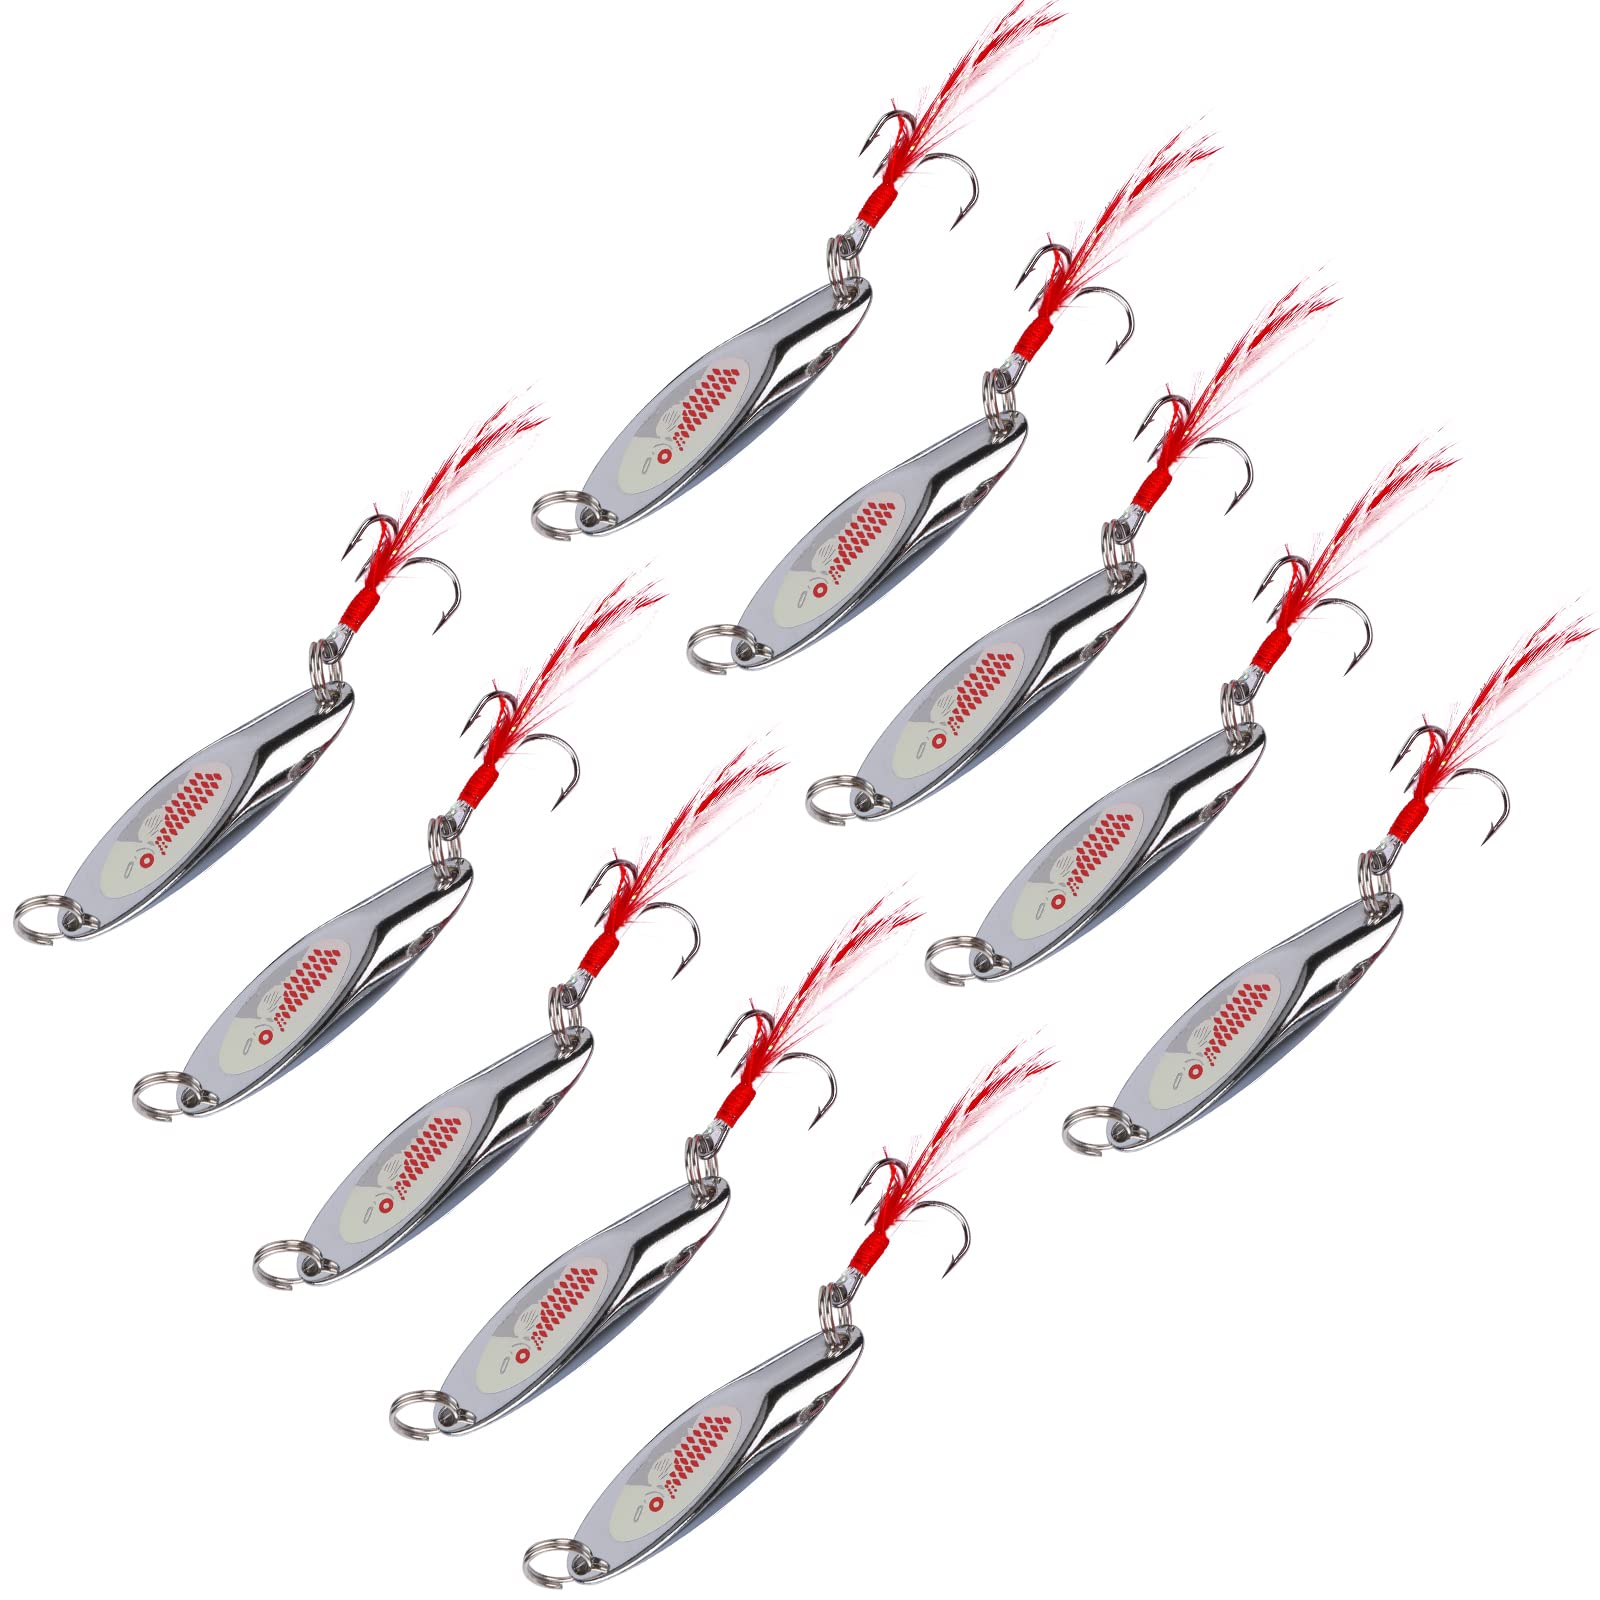 Goture Fishing Lures Fishing Spoons,Hard Lures Saltwater Spoon Lures  Casting Spoon/Ice Fishing Jigs for Trout Bass Pike Walleye Crappie Bluegill  1/10oz 1/8oz 1/7oz 1/6oz 1/5oz Bucktail spoon lures-10pcs 1.85 / 0.35 oz.